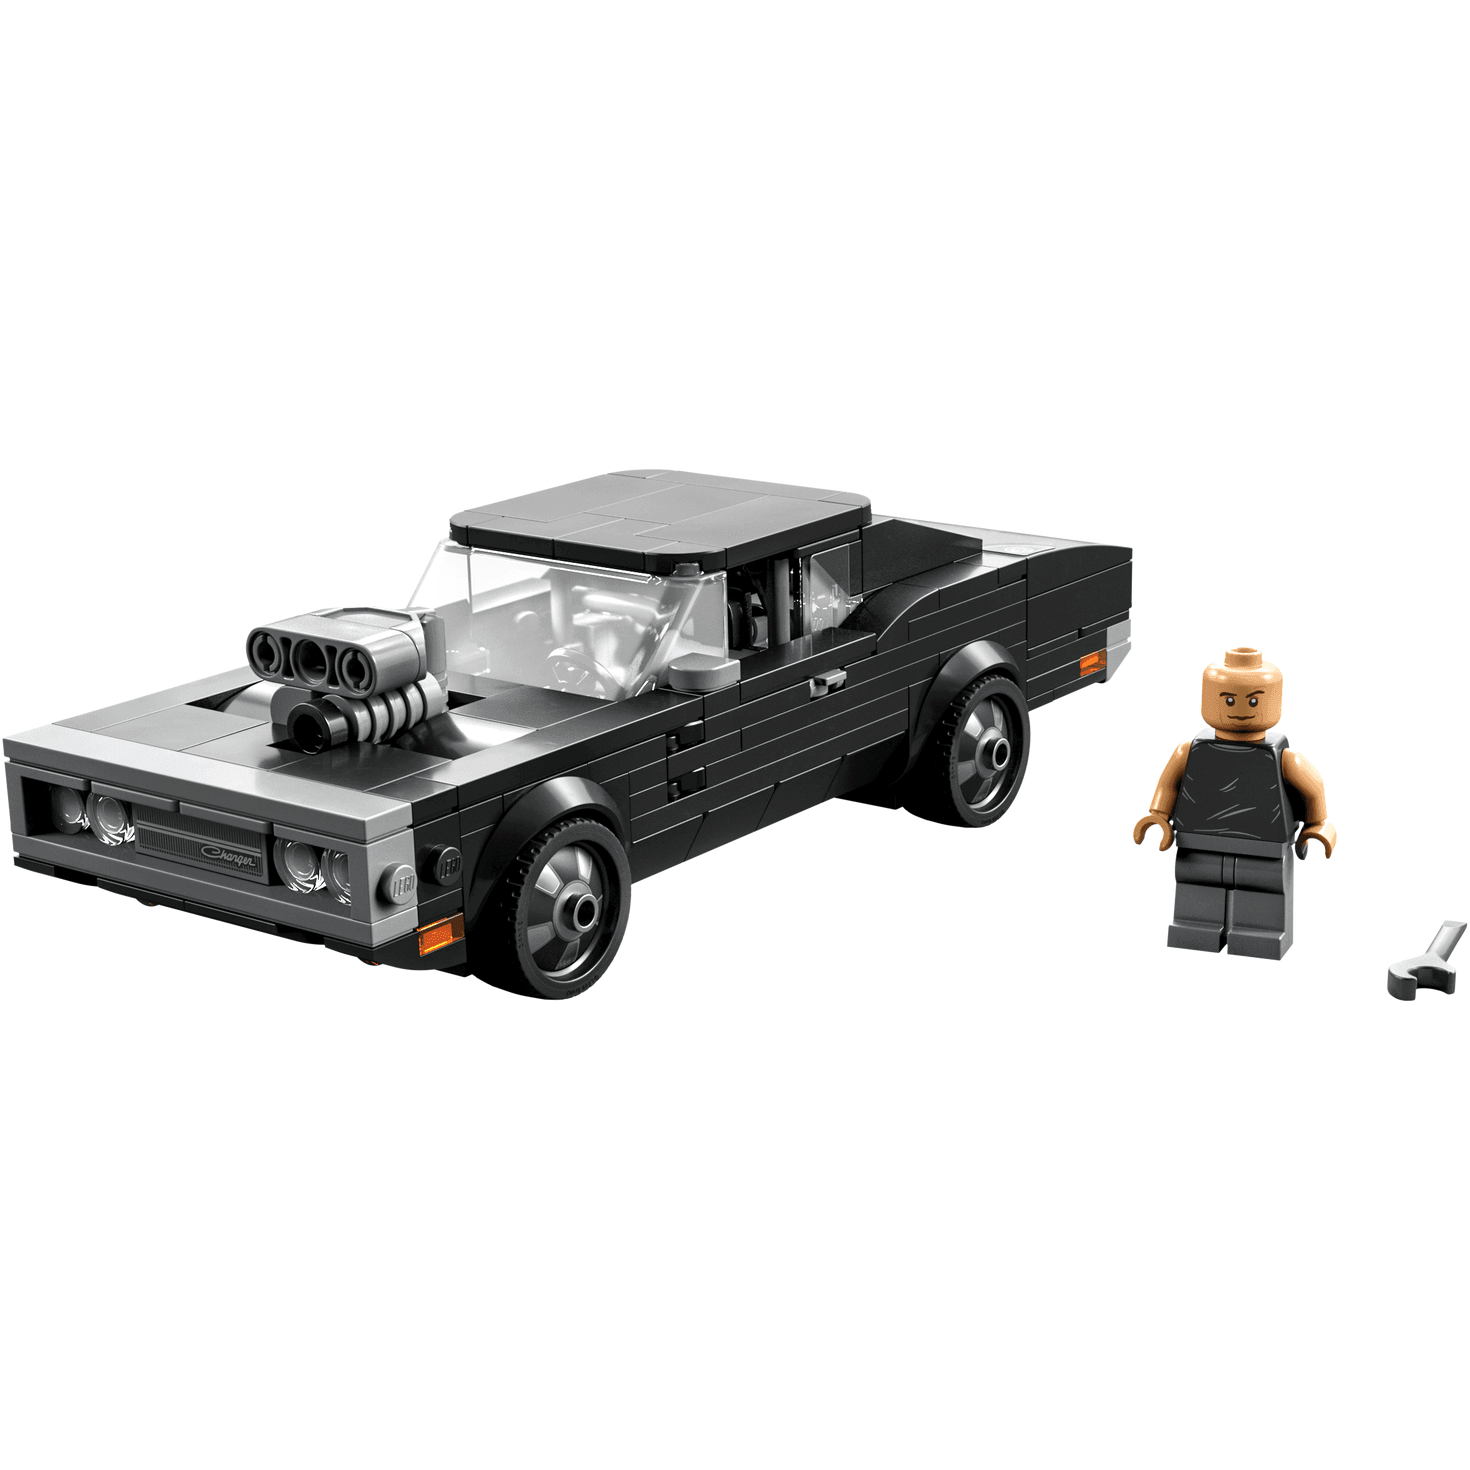 LEGO 76912 Fast & Furious 1970 Dodge Charger R/T 345 Pieces - BumbleToys - 14 Years & Up, 5-7 Years, Boys, LEGO, OXE, Pre-Order